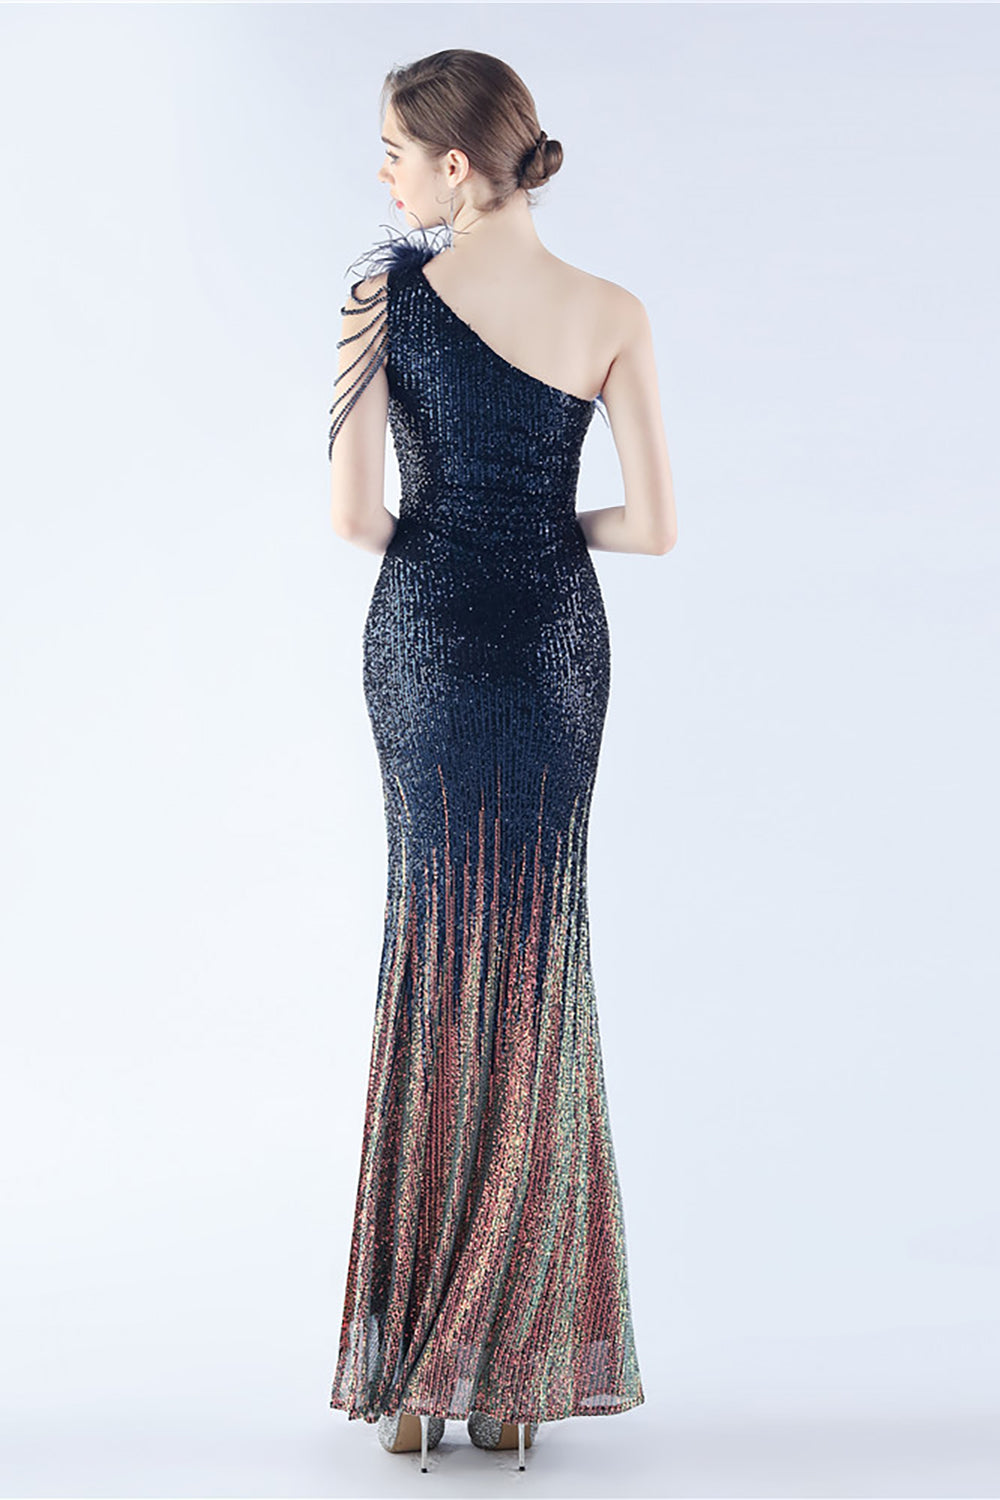 Glitter Black Beaded Bodycon Feather Slope-Neck One-Shoulder Evening Dress With Slit